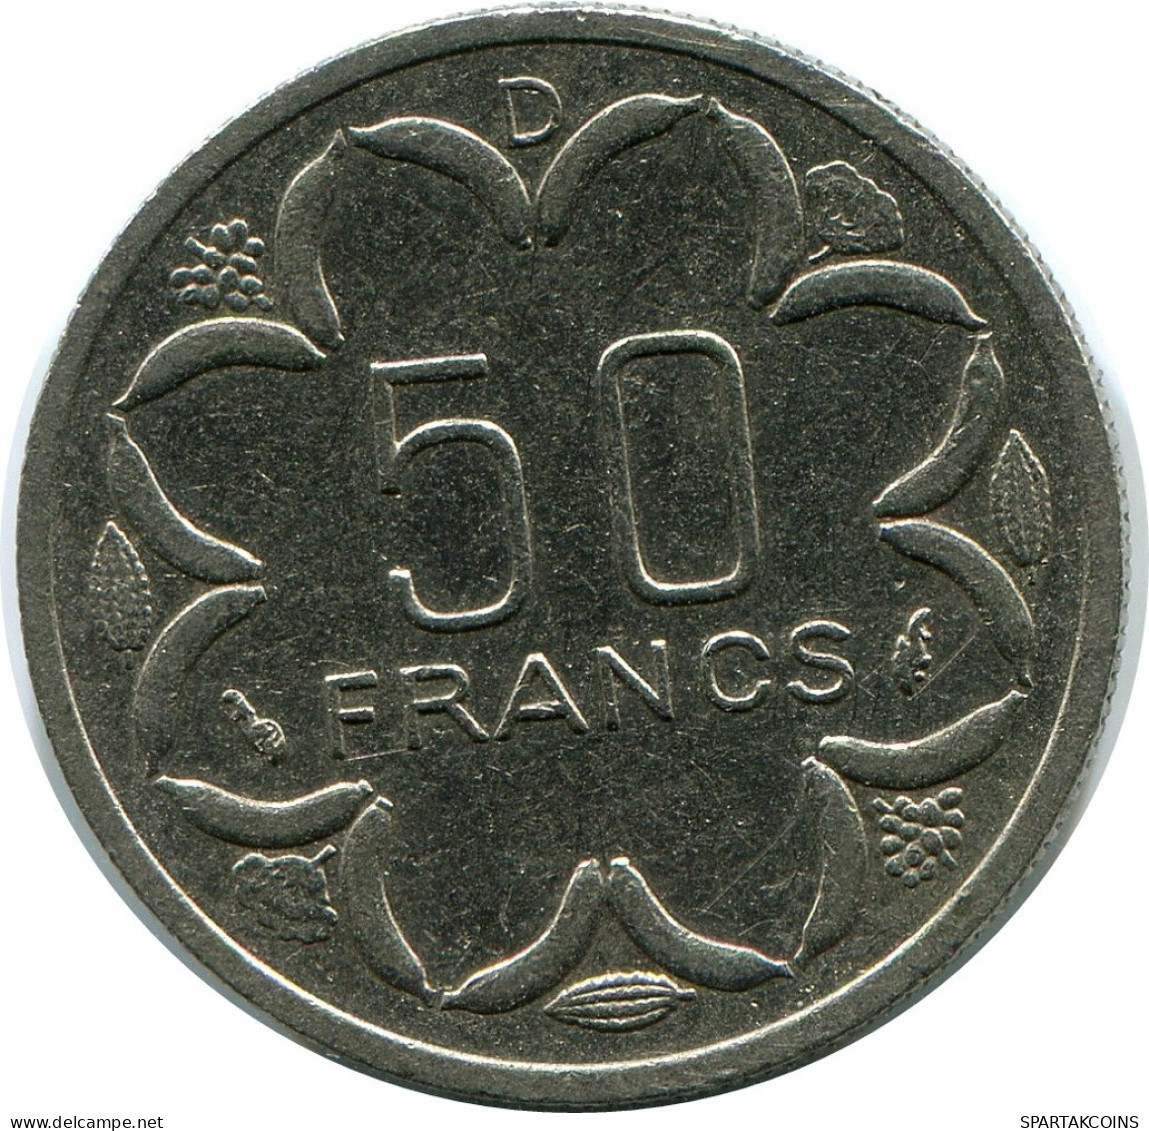 50 FRANCS CFA 1976 CENTRAL AFRICAN STATES (BEAC) Münze #AP867.D.A - Central African Republic